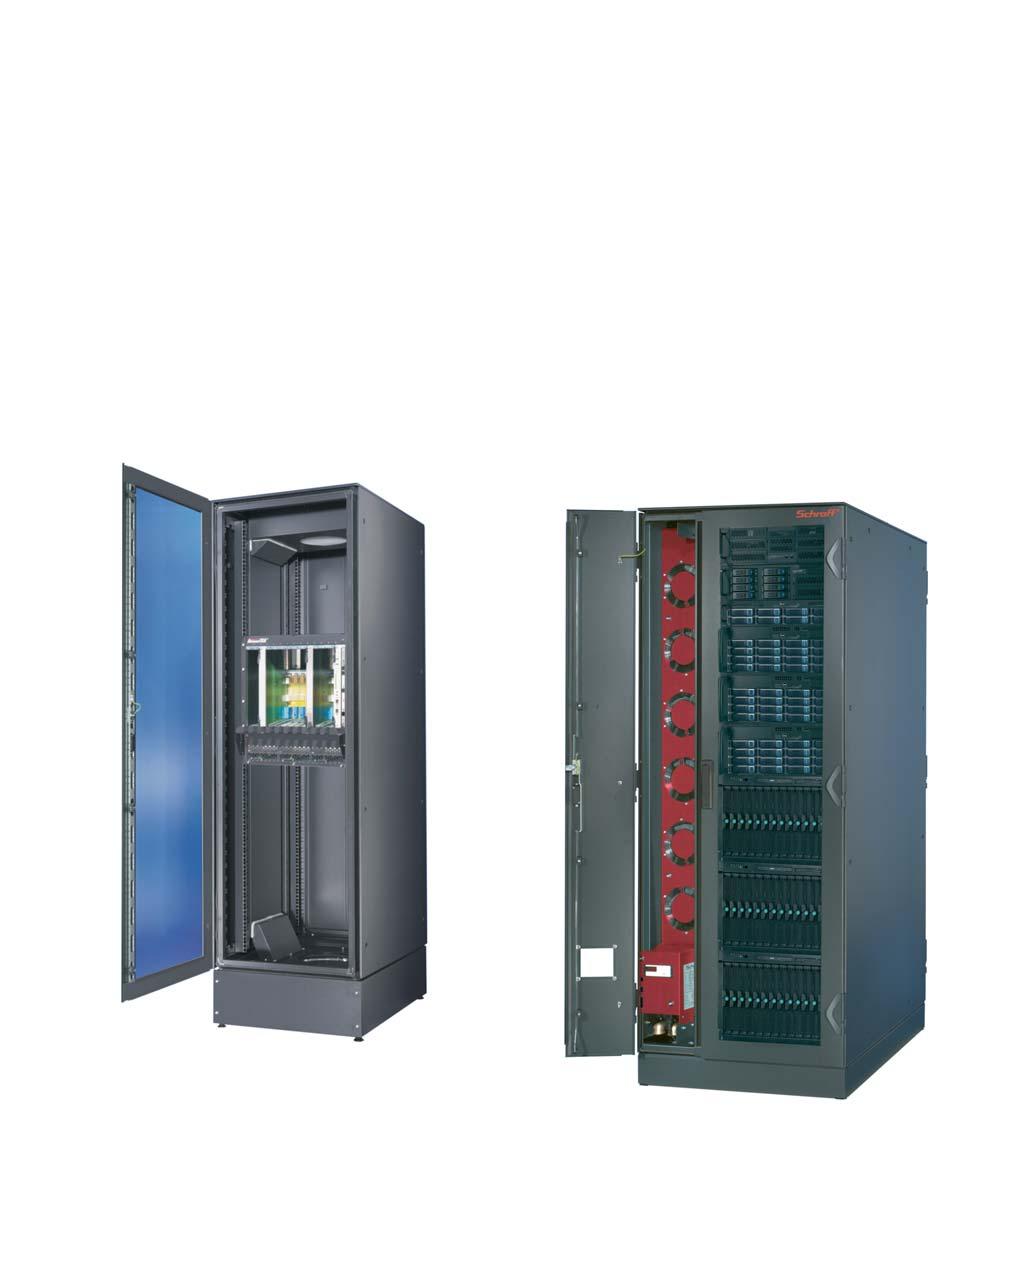 Climate control Overview Overview...... 4.0 Cooling concepts........ 4.2 Air/water heat exchangers Complete cabinet solutions For industry and data centers Cooling capacities up to 40 kw 19" fan trays.